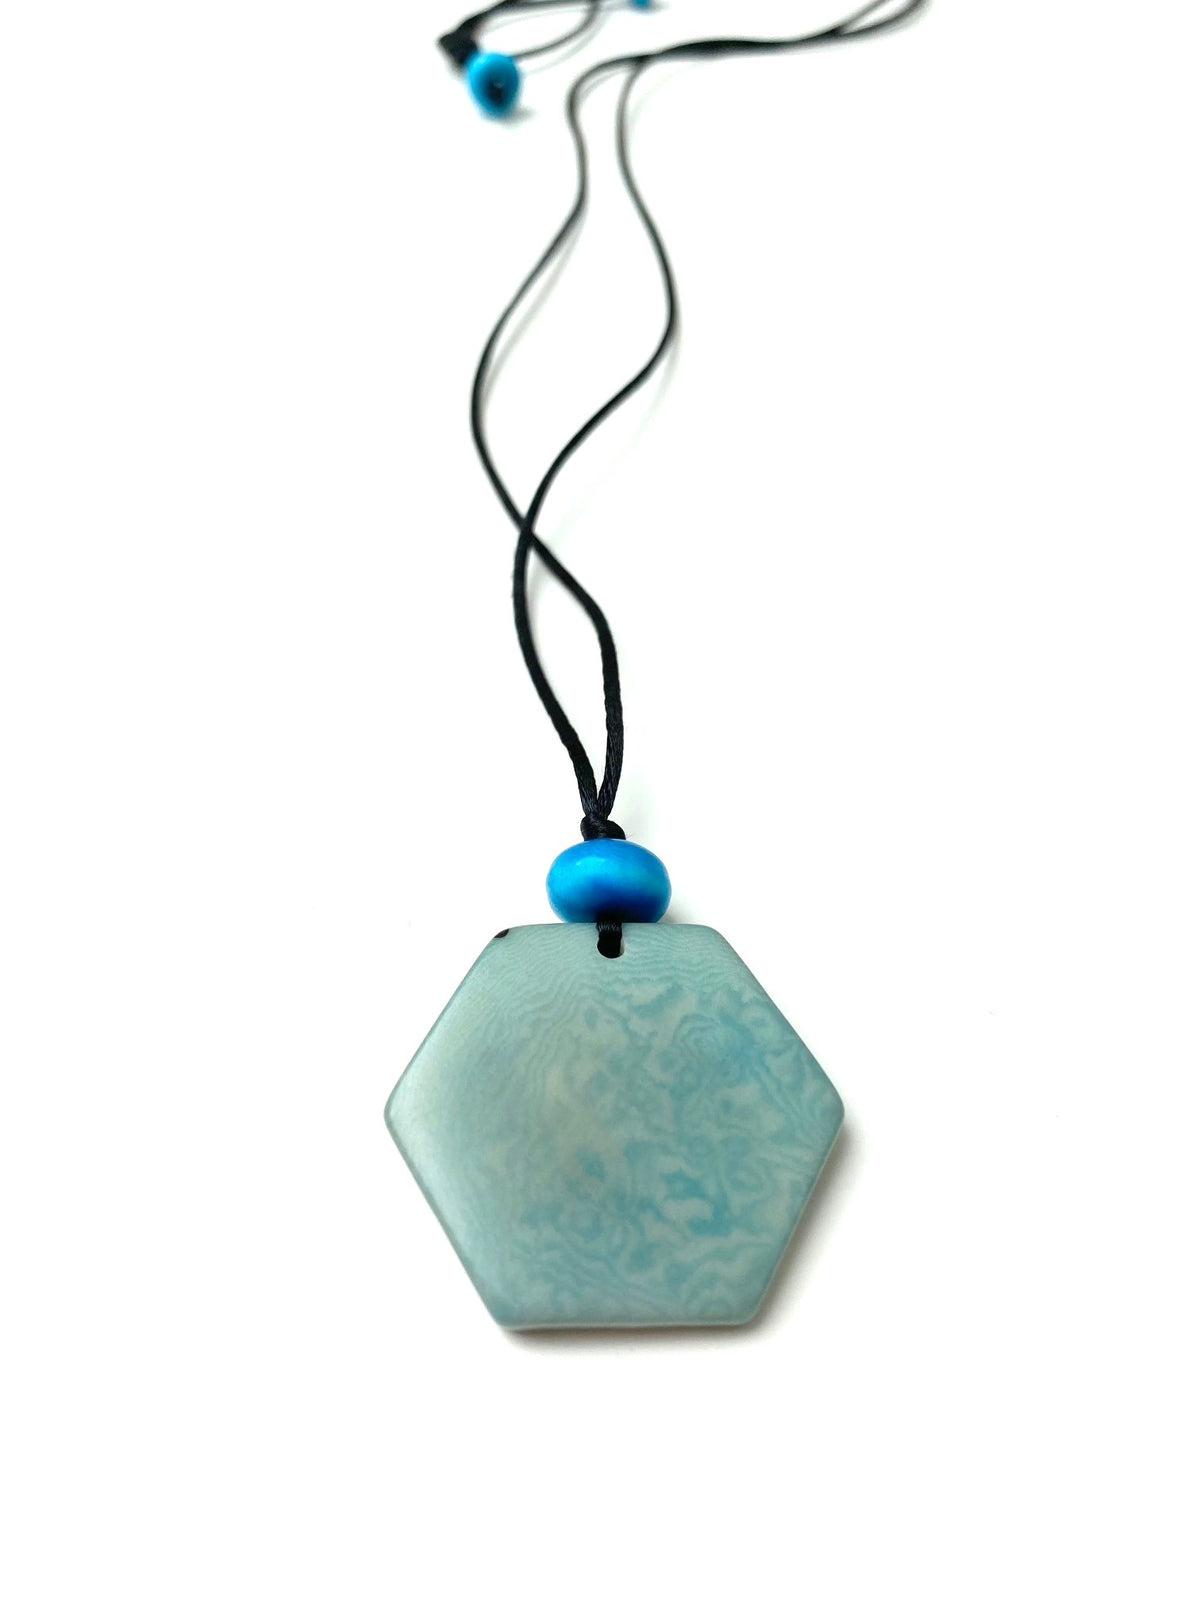 Hexagon pendant necklace - Blue Sky with Turquoise